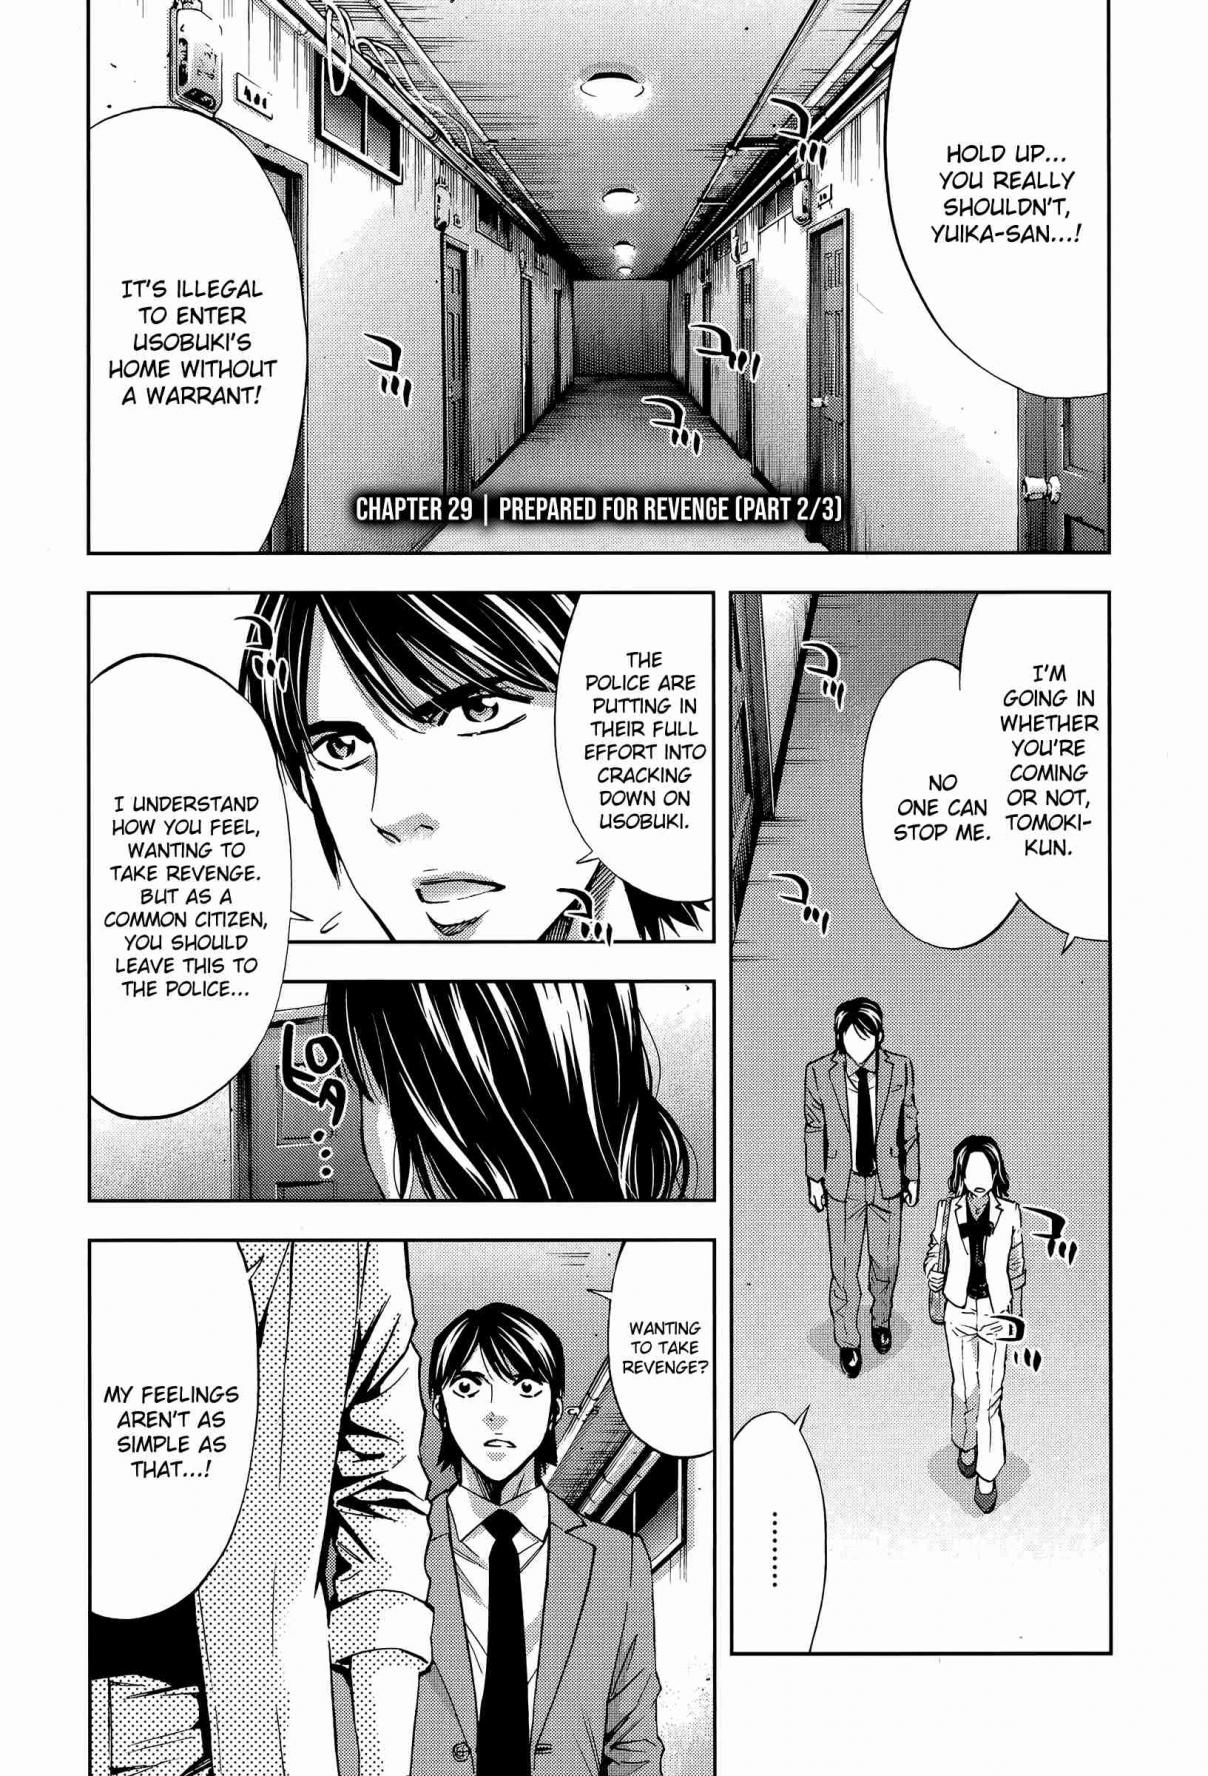 Funouhan Vol. 5 Ch. 29 Prepared for Revenge (part 2/3)